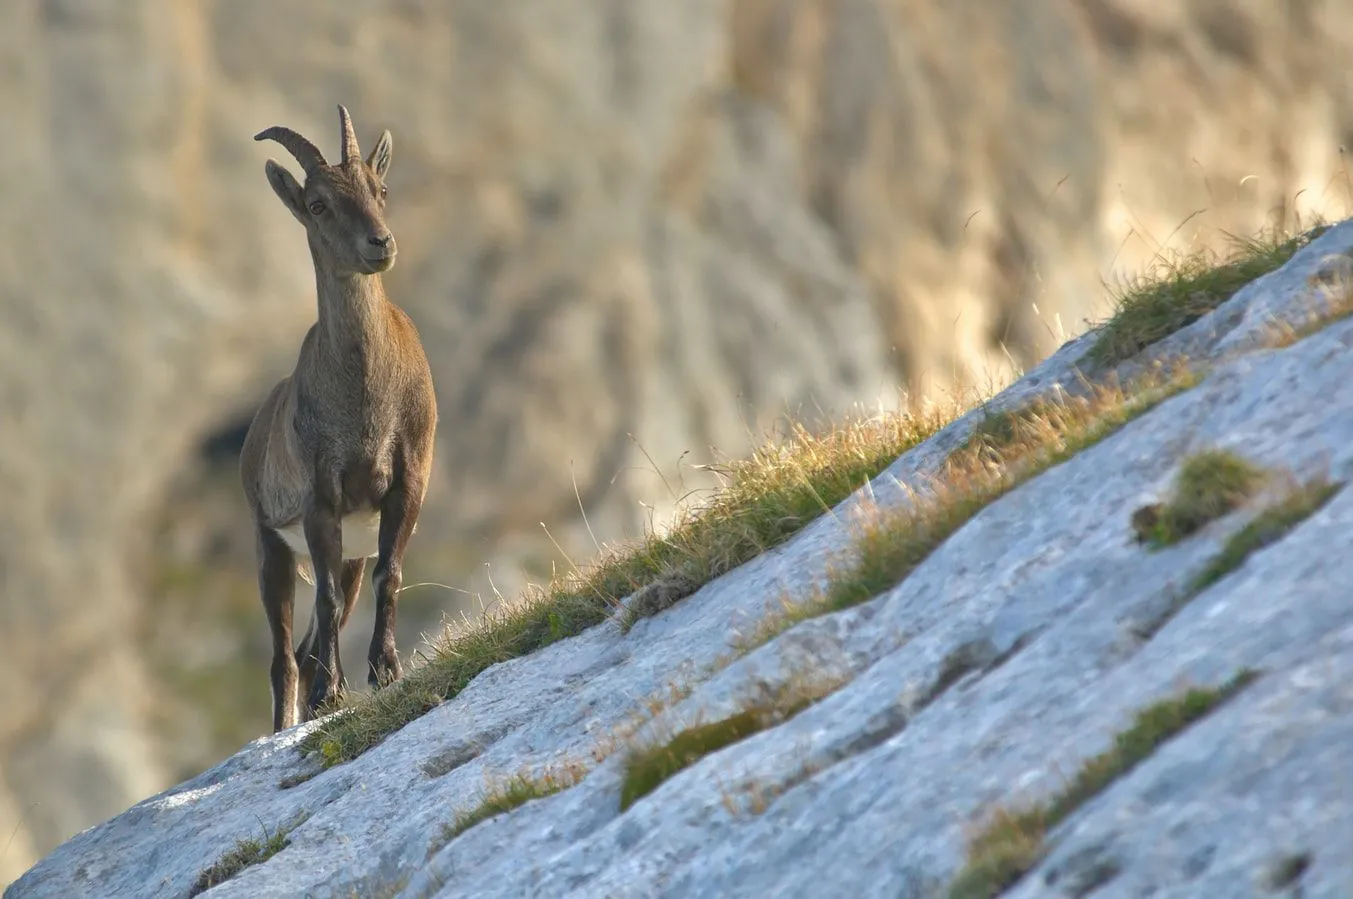 Pyrenean ibex resemble goats with sharp horns.